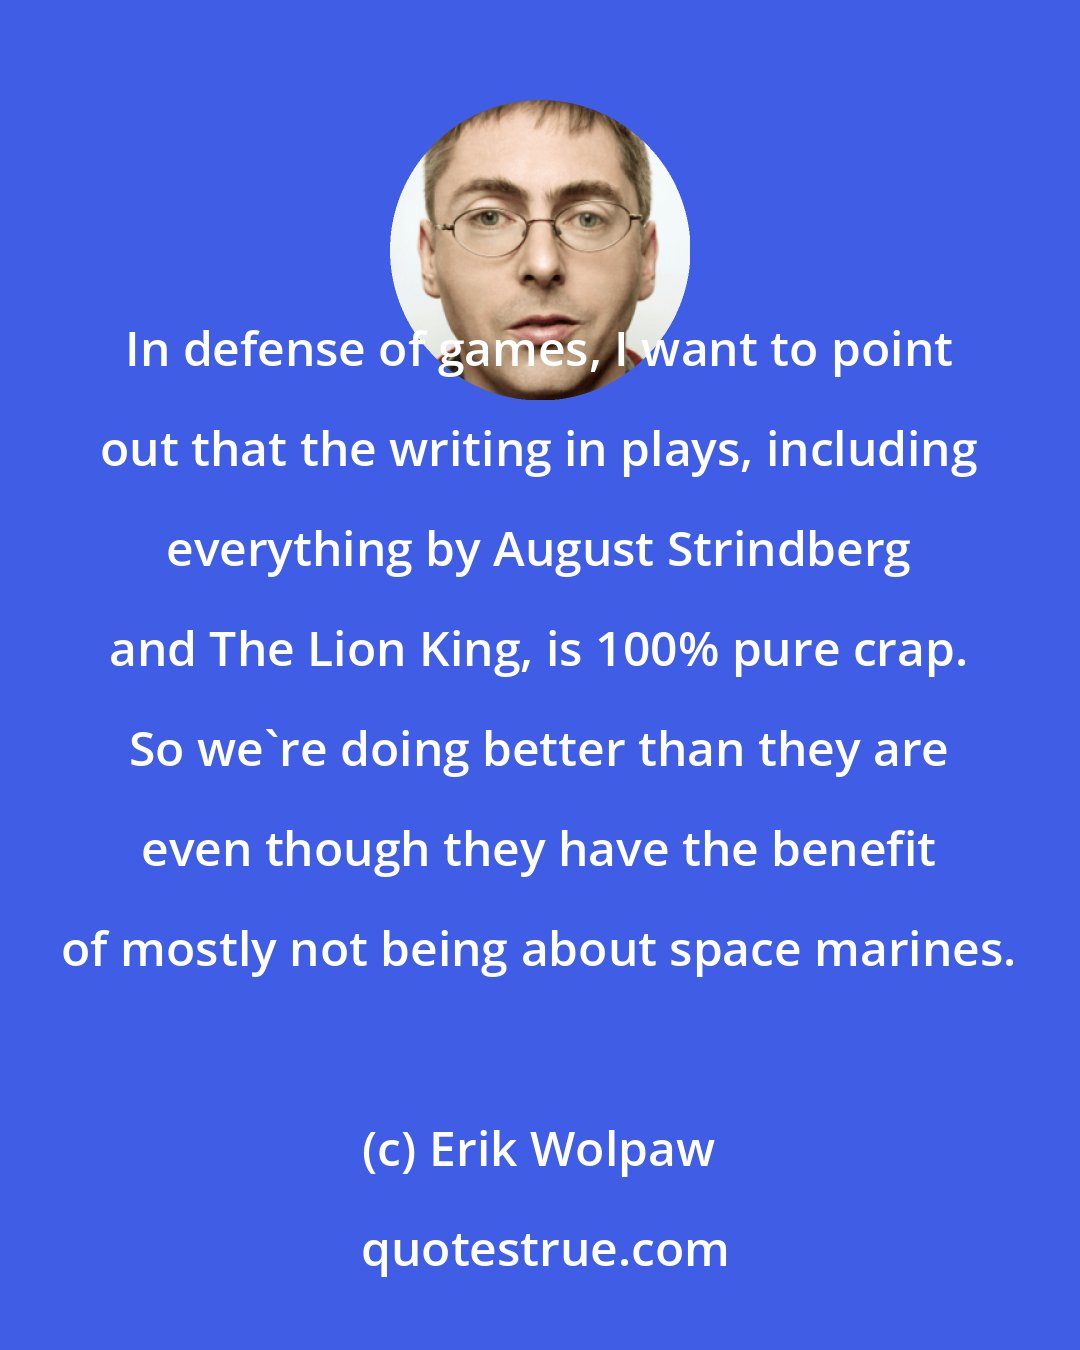 Erik Wolpaw: In defense of games, I want to point out that the writing in plays, including everything by August Strindberg and The Lion King, is 100% pure crap. So we're doing better than they are even though they have the benefit of mostly not being about space marines.